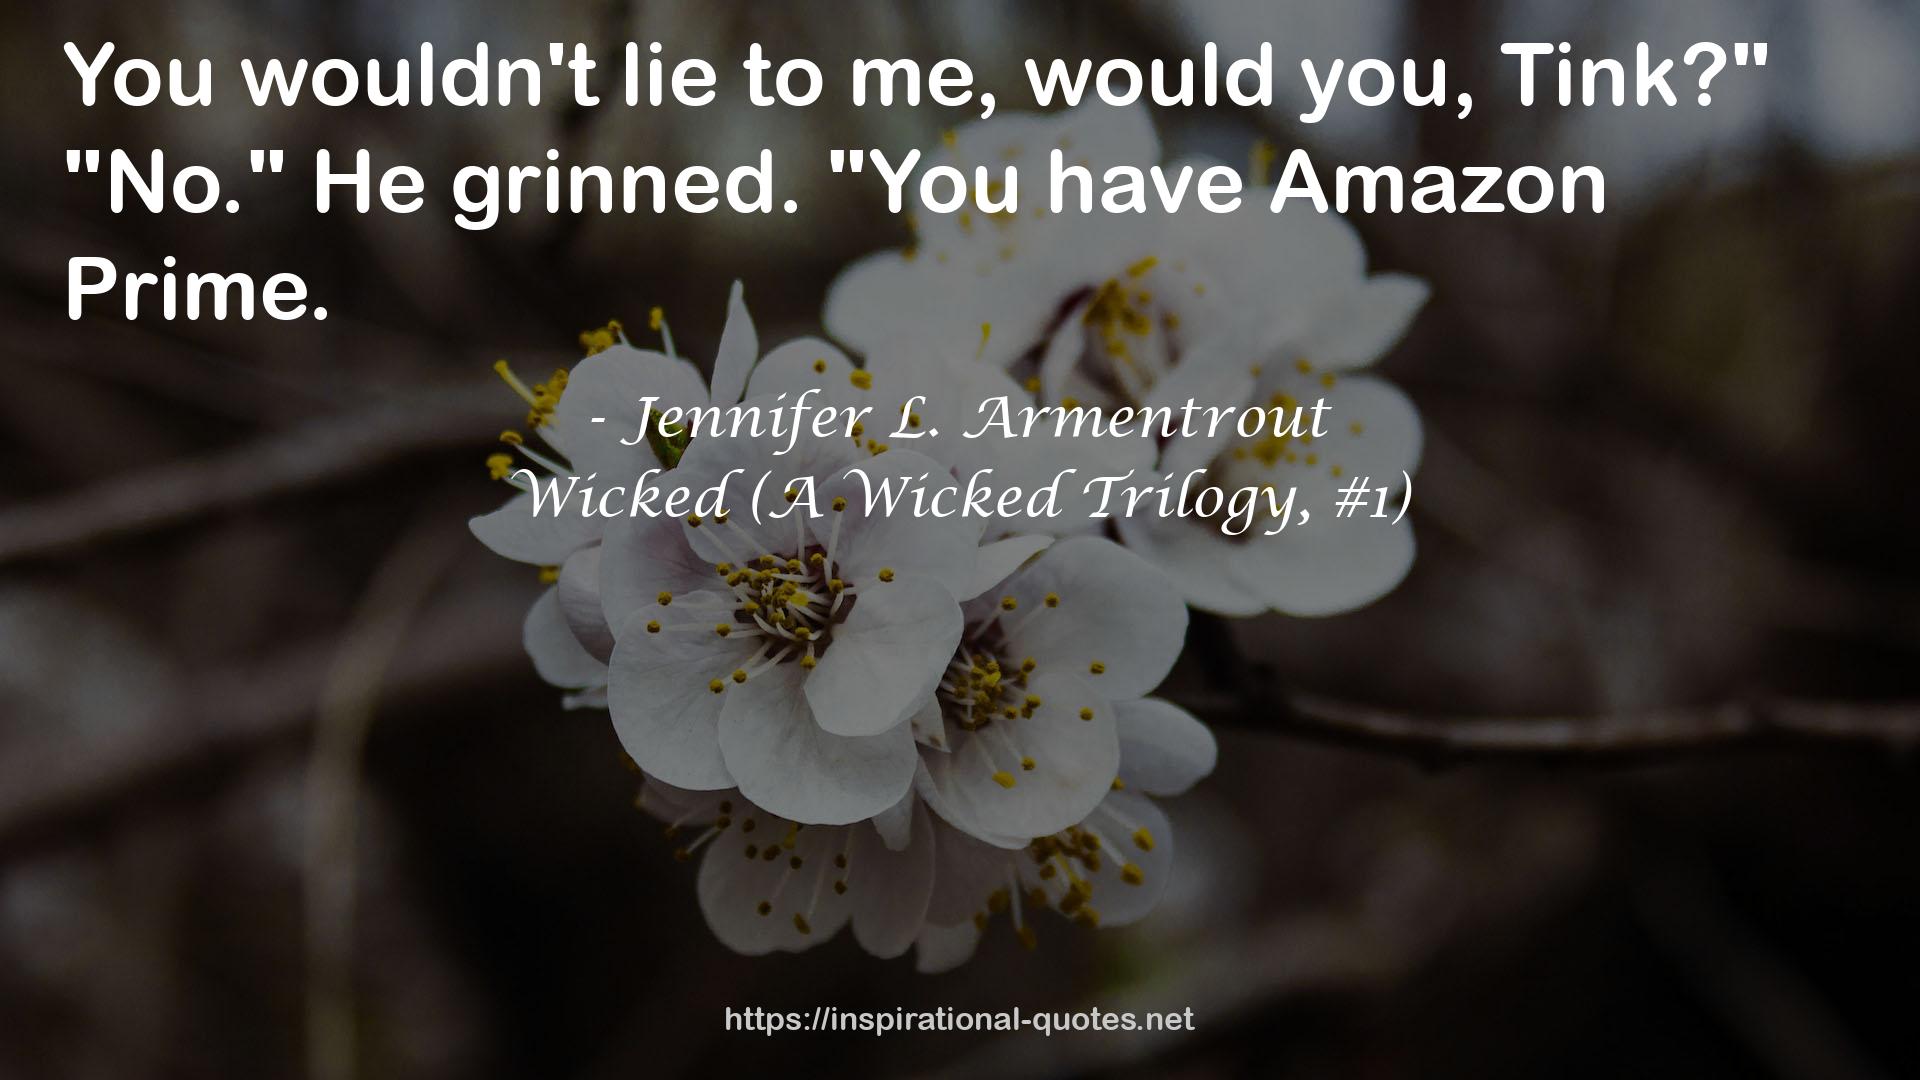 Wicked (A Wicked Trilogy, #1) QUOTES